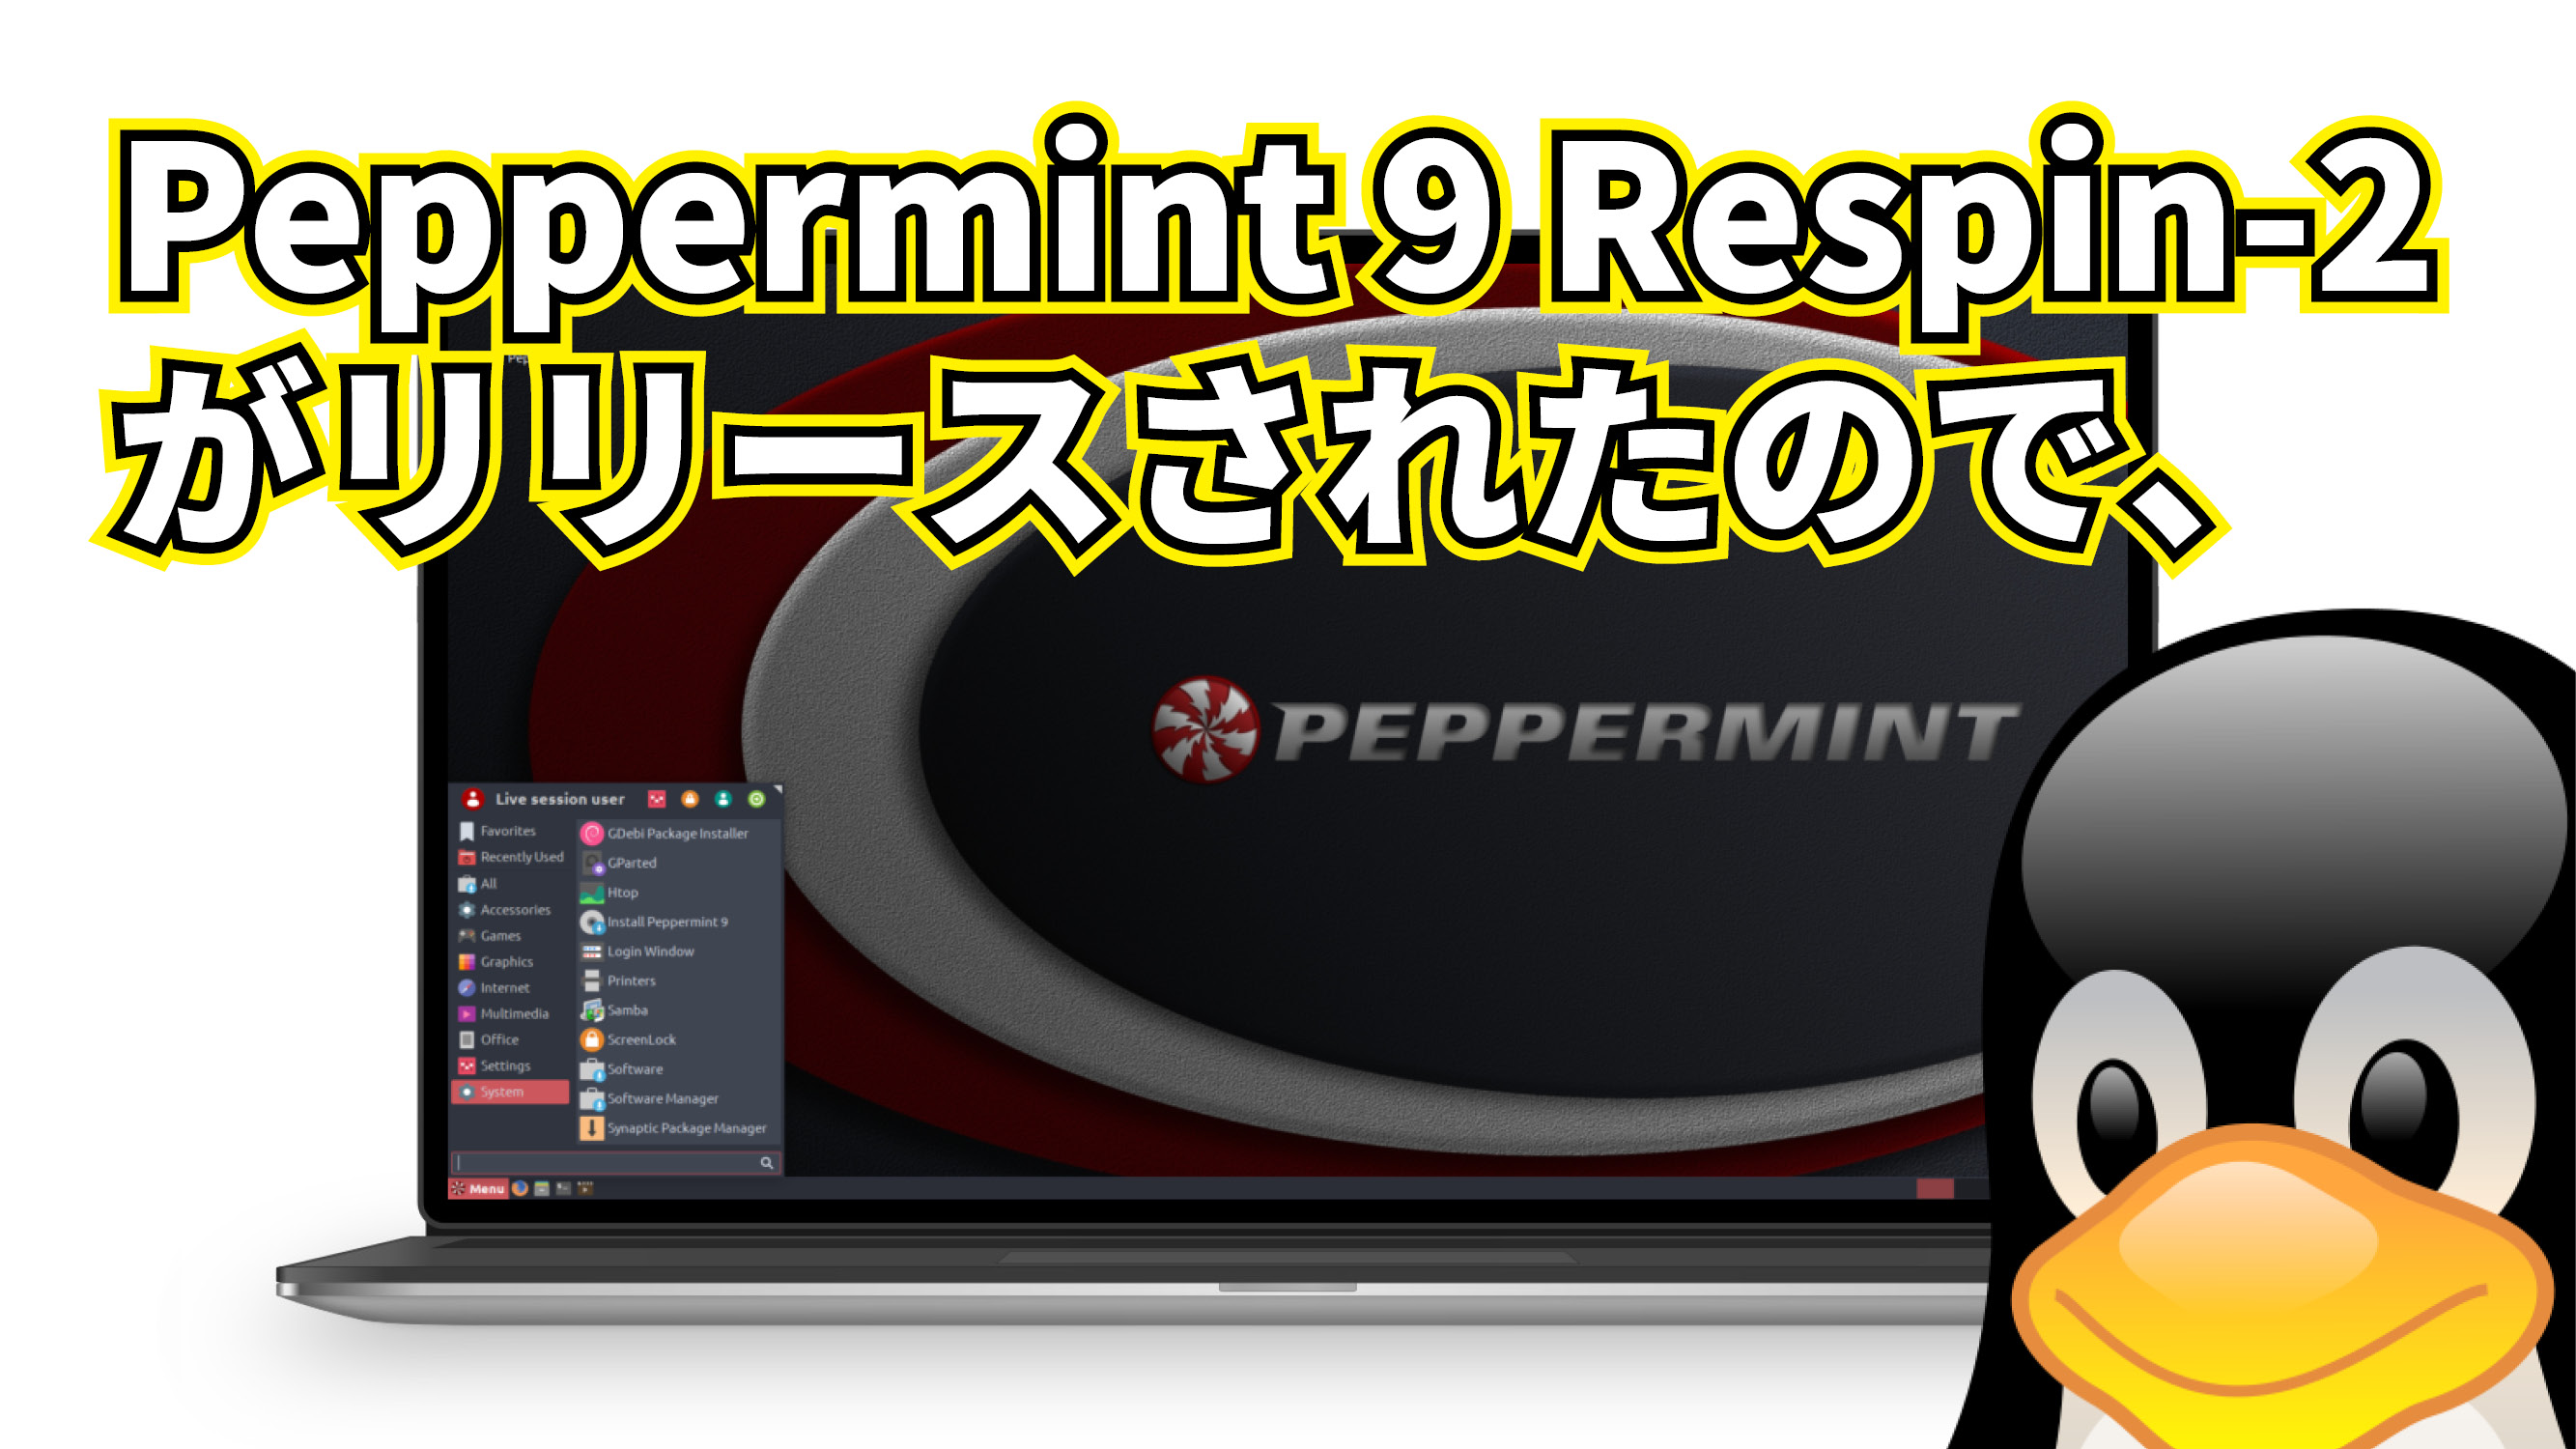 Peppermint 9 Respin-2 がリリースされたので、